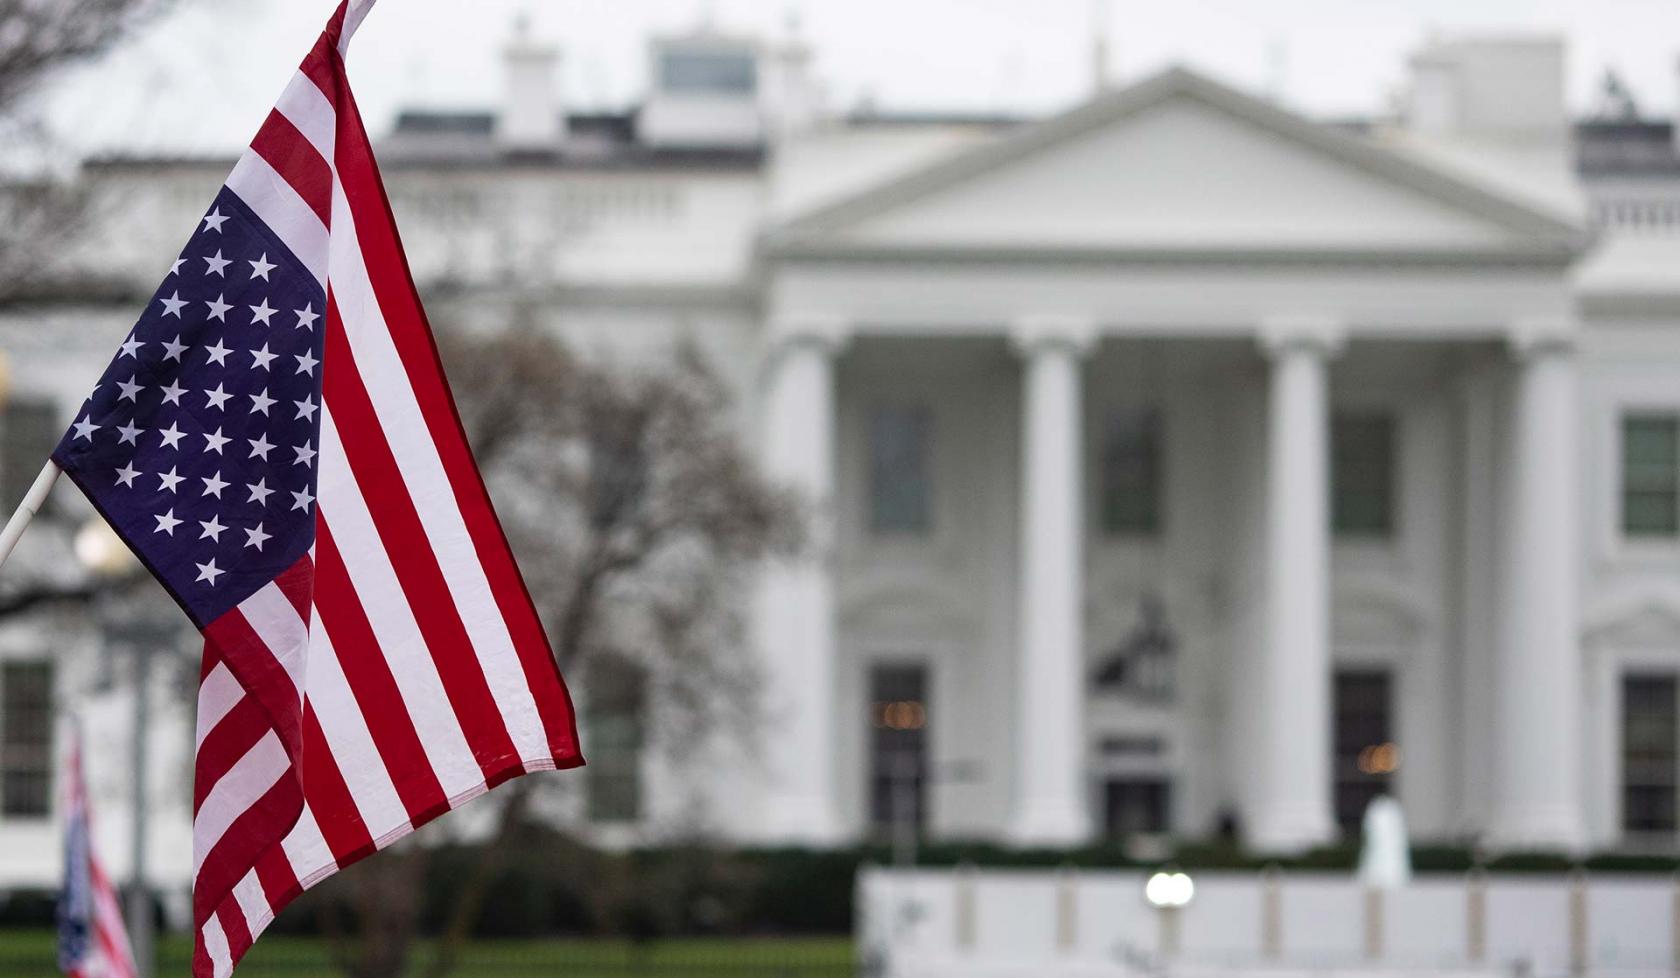 American Flag Hanging Outside of the White House